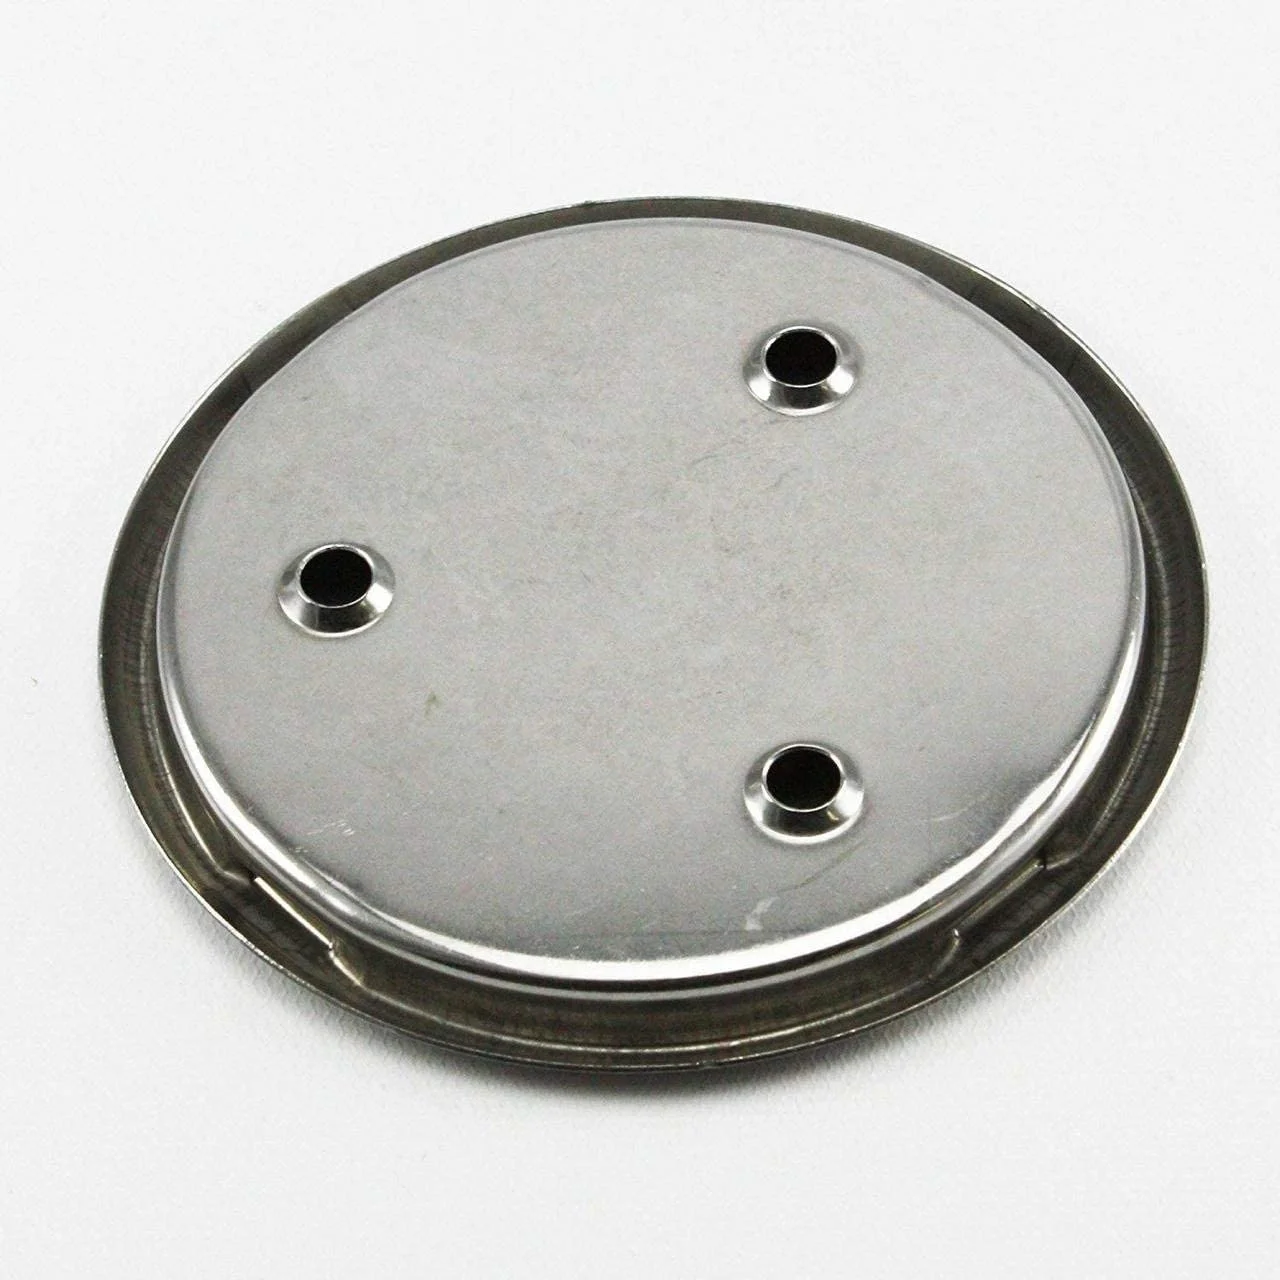 
W10191926 Screw Seal for KitchenAid, Whirlpool Mixer Blender Parts 